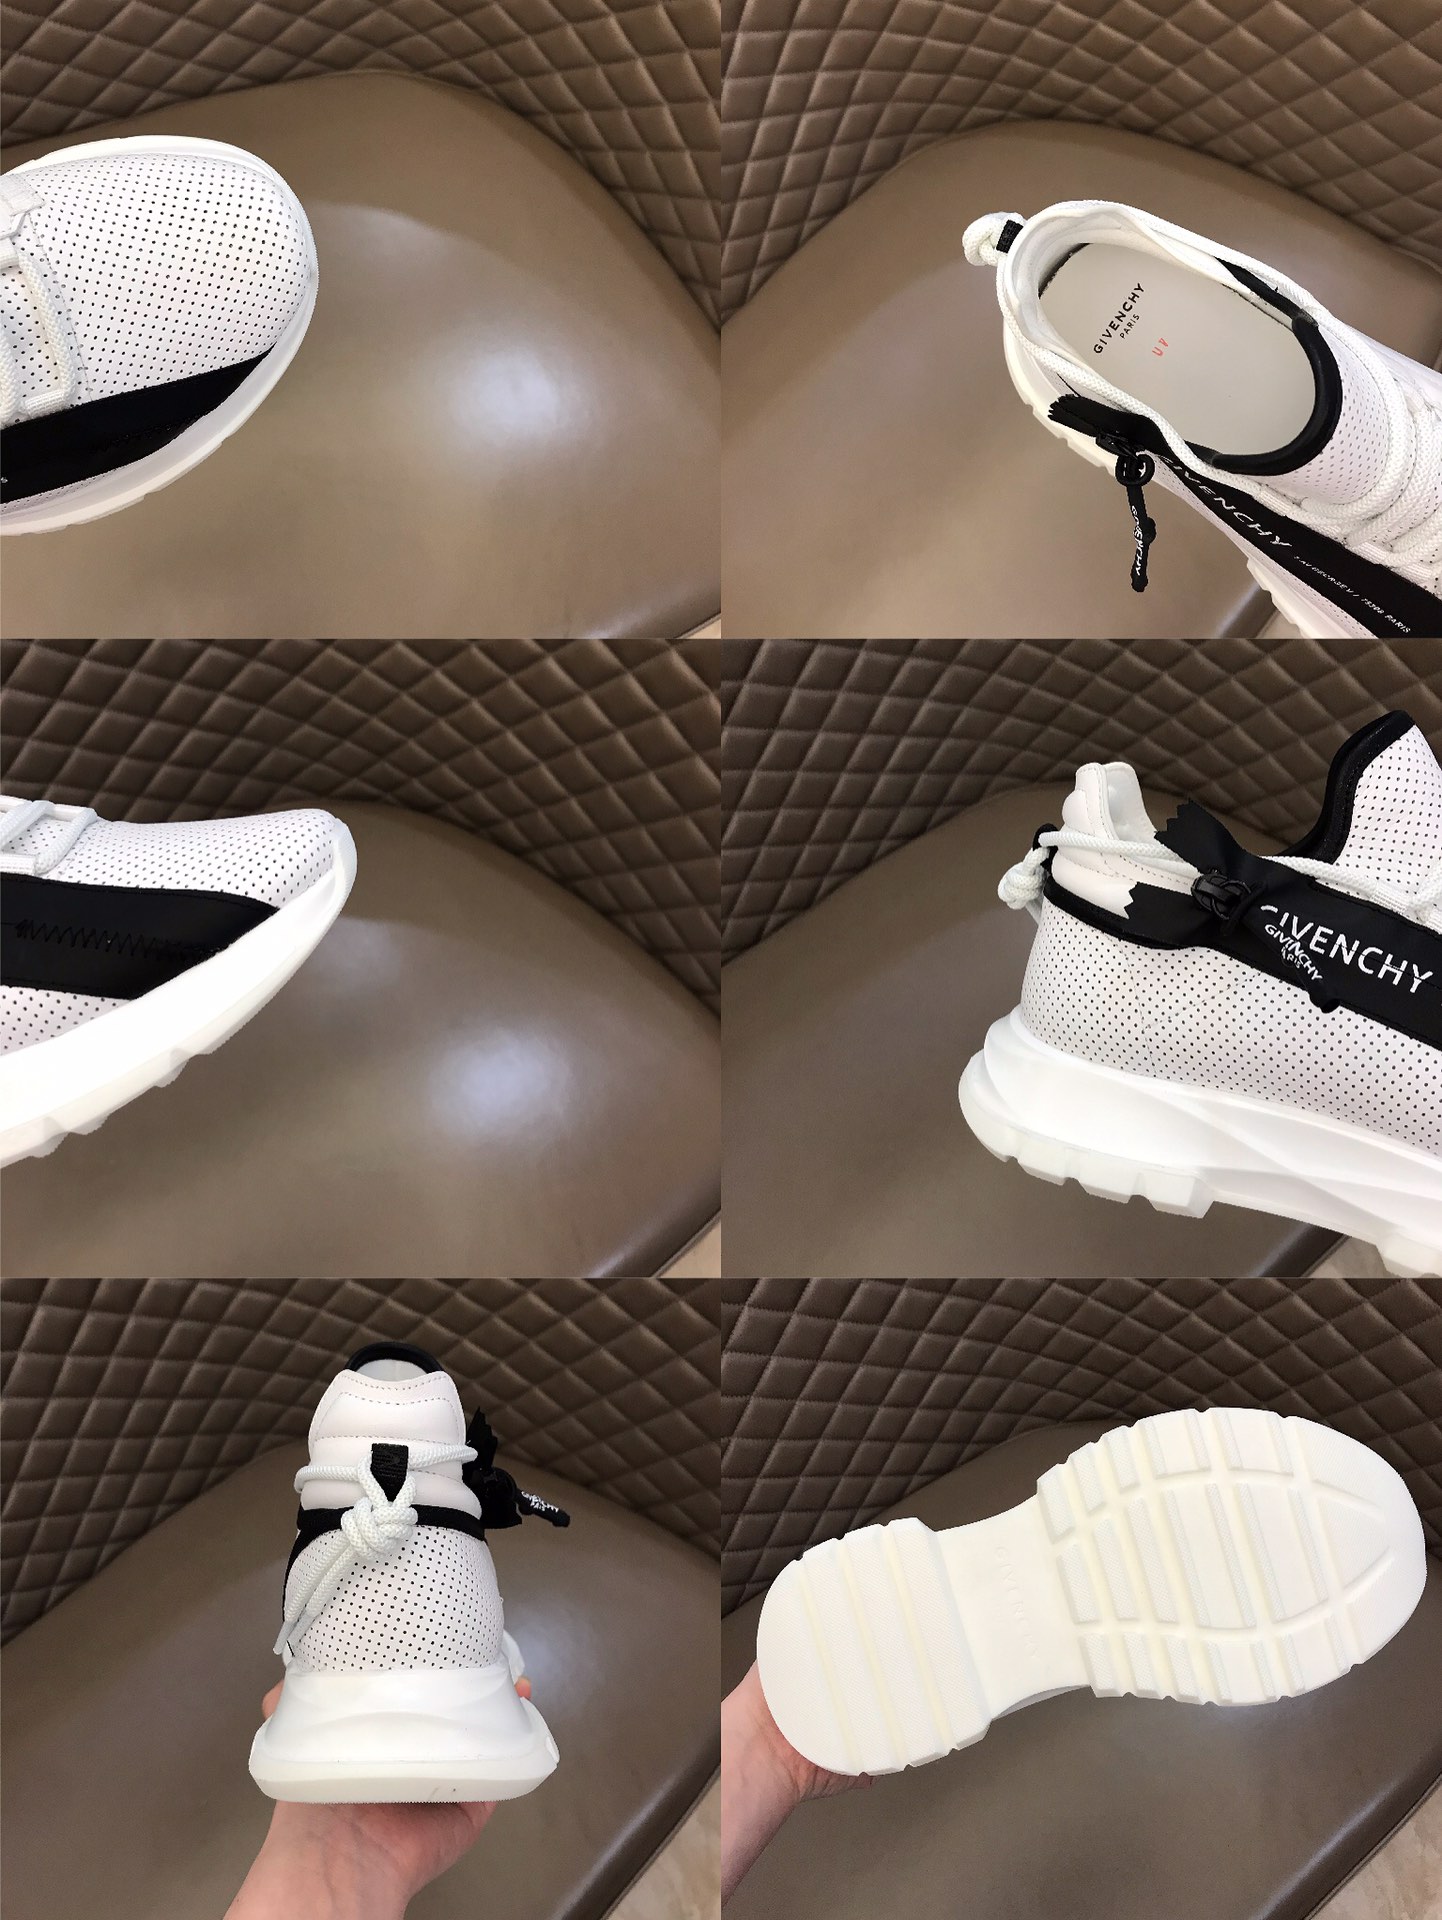 Givenchy Sneaker Spectre in White with Black